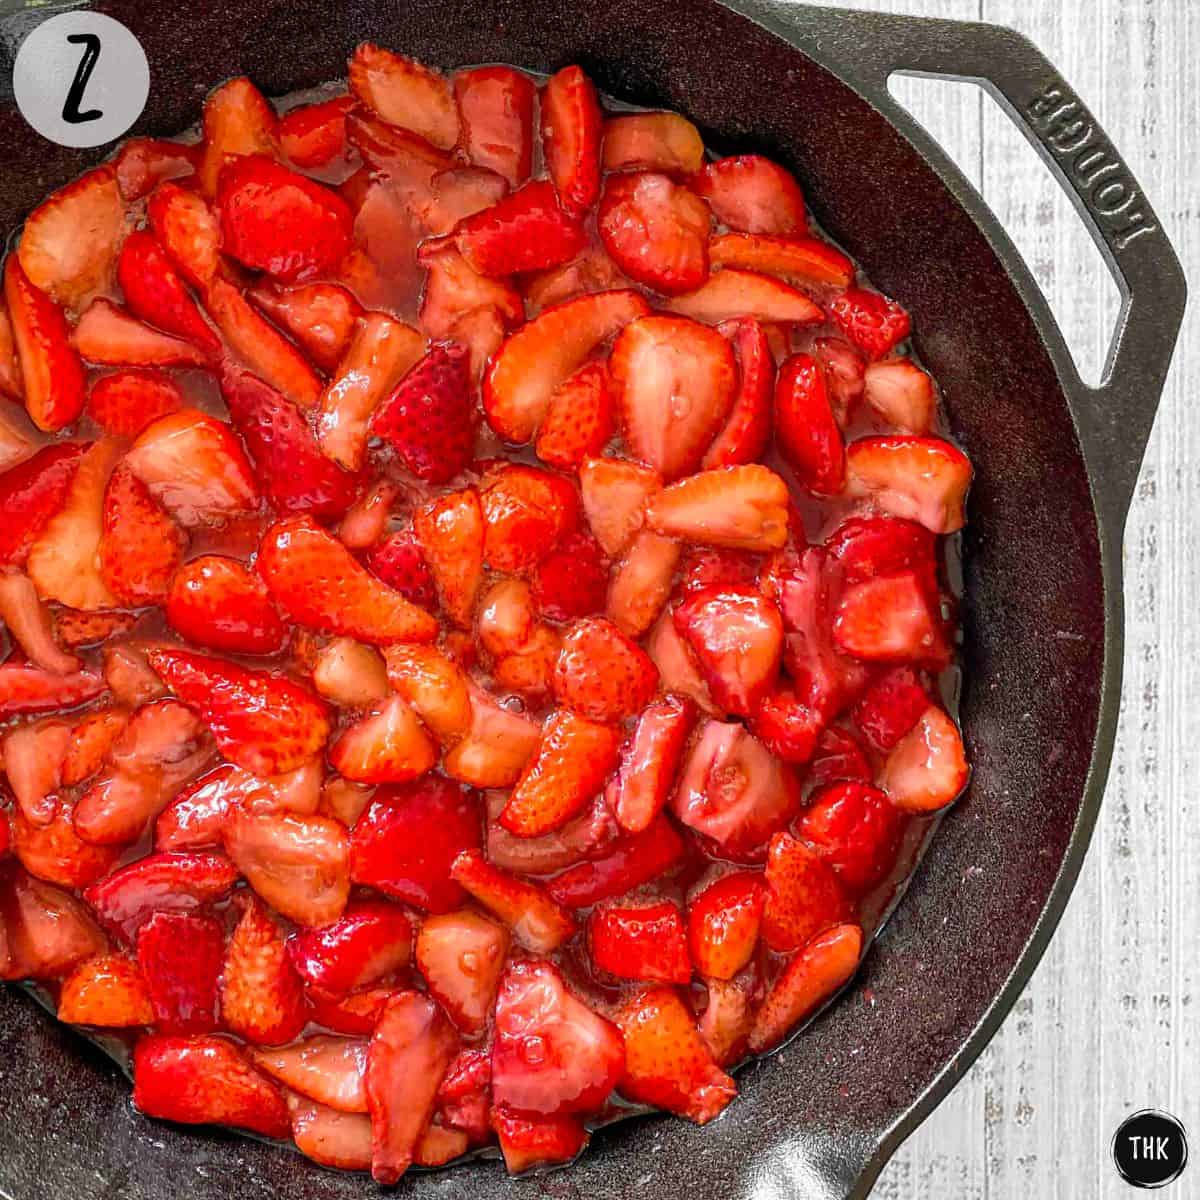 Cooked strawberries inside cast iron pan.